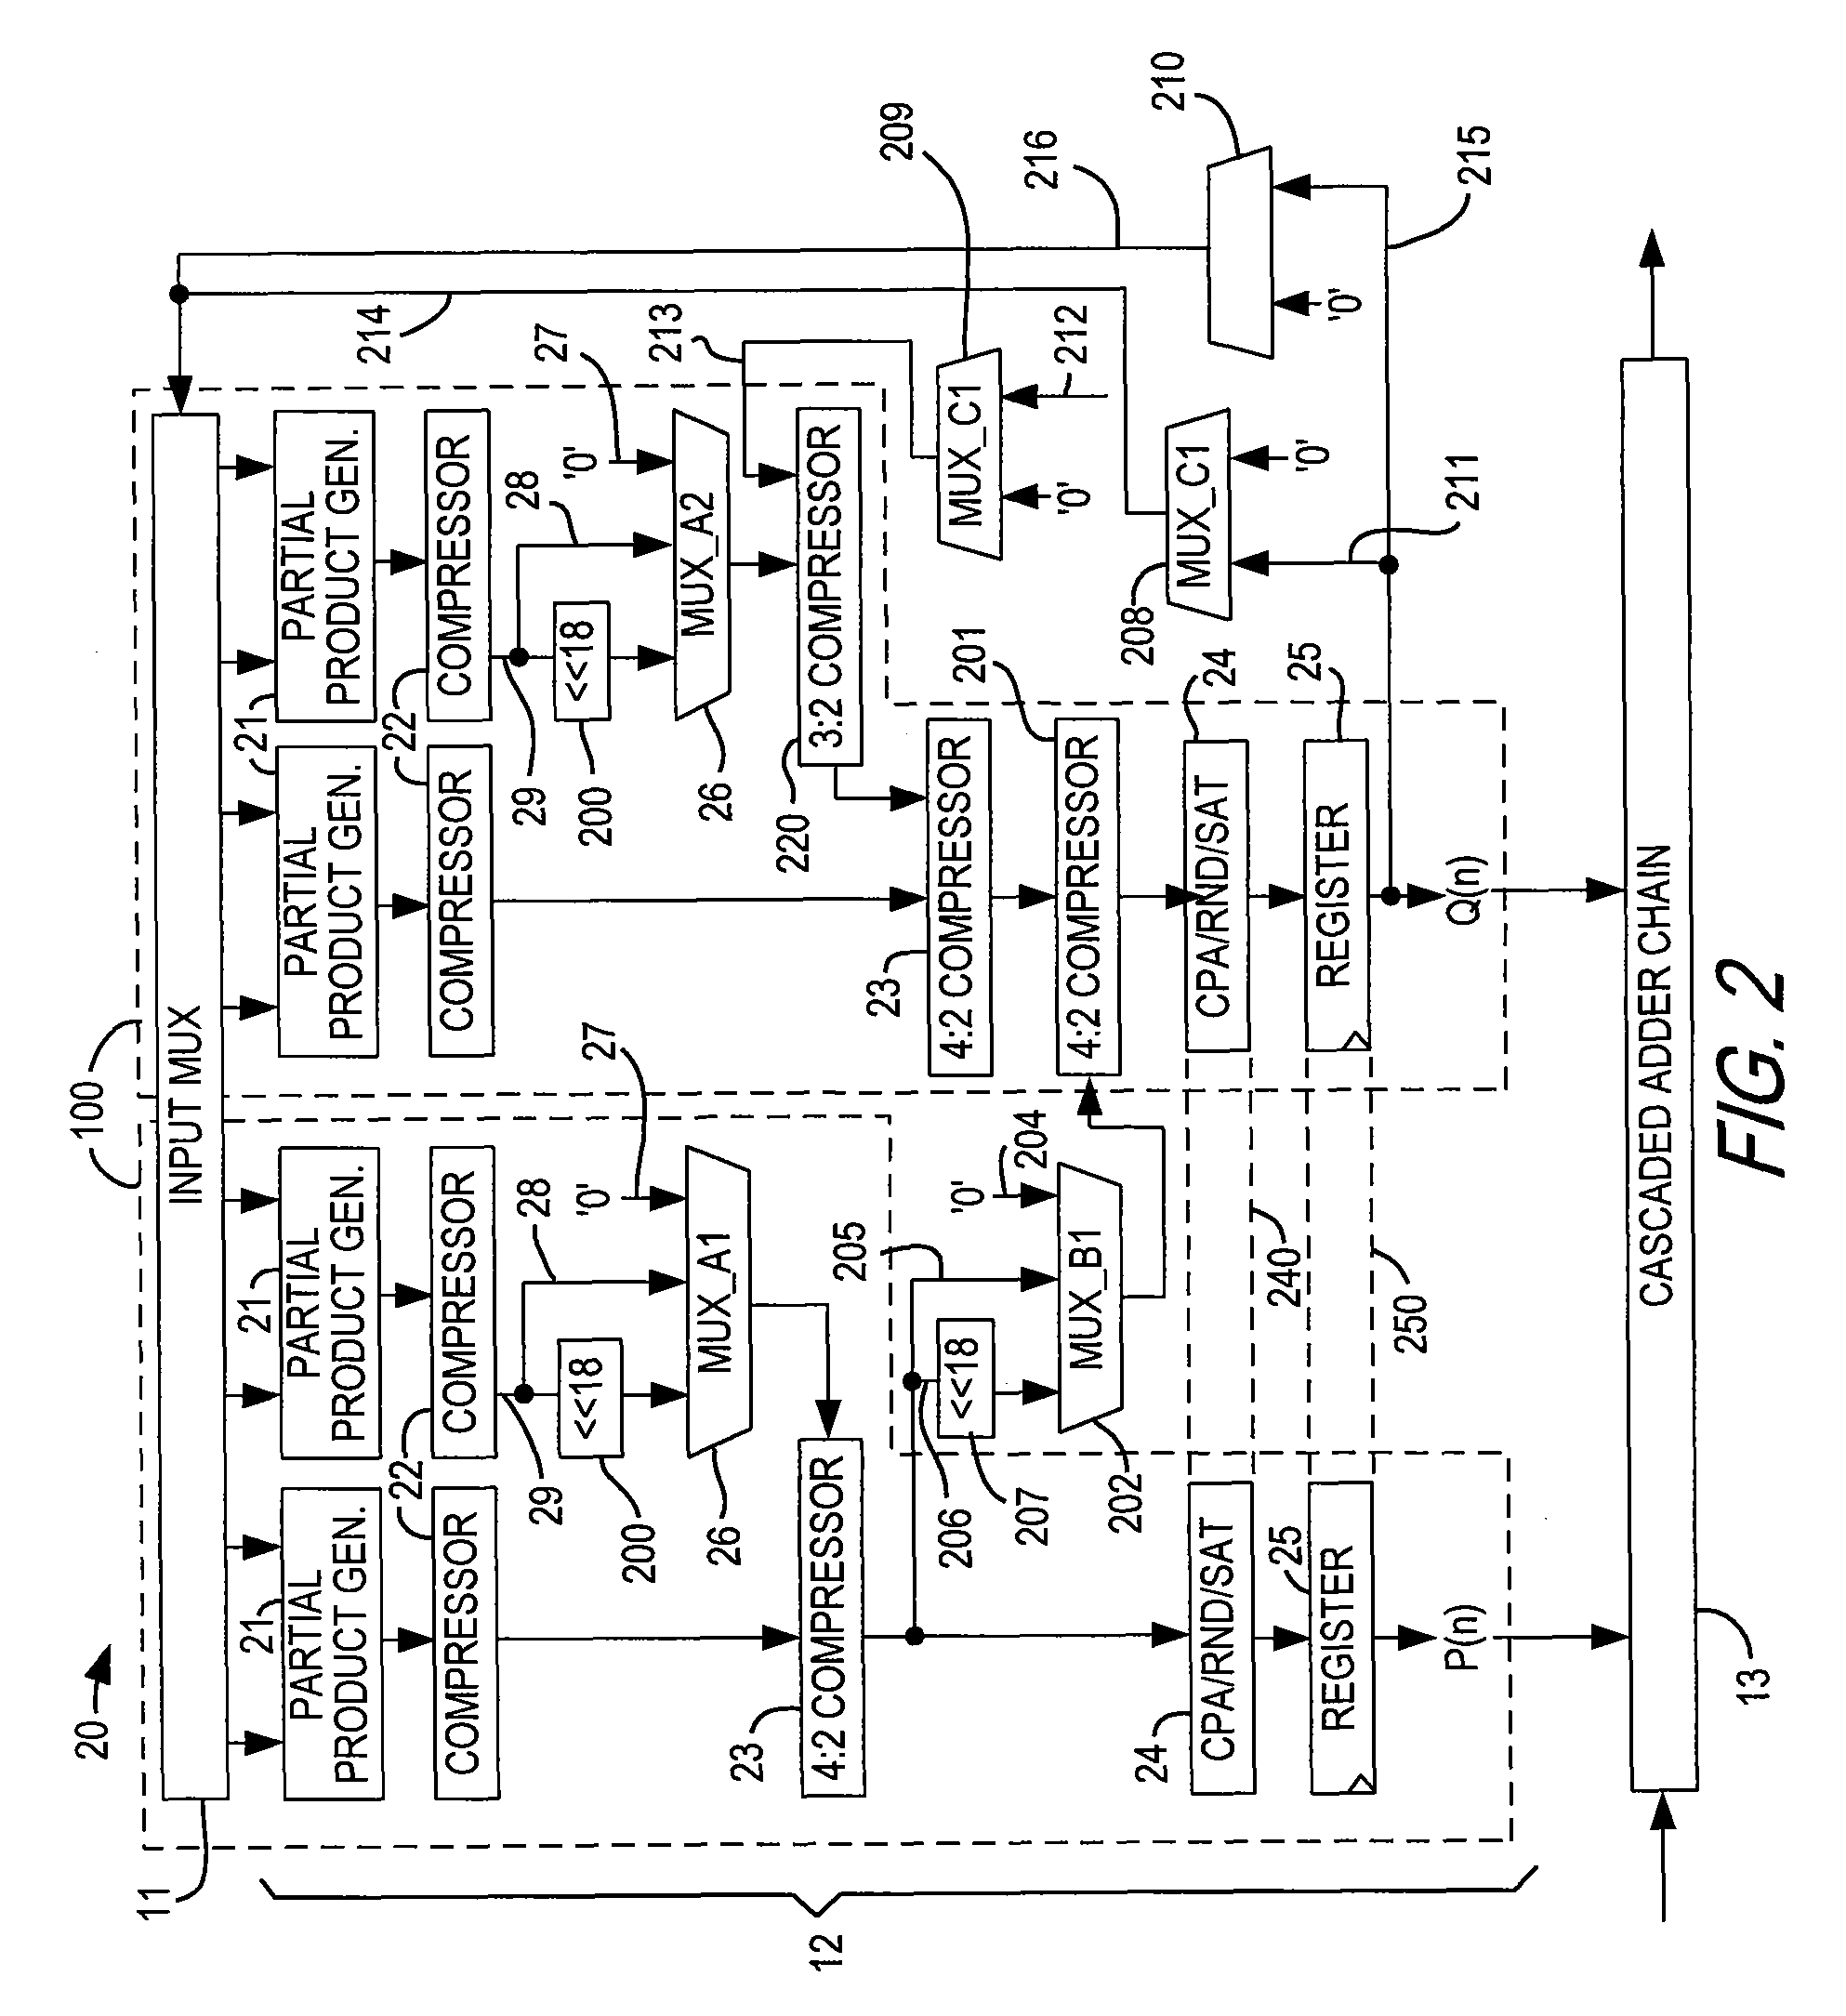 Specialized processing block for programmable logic device